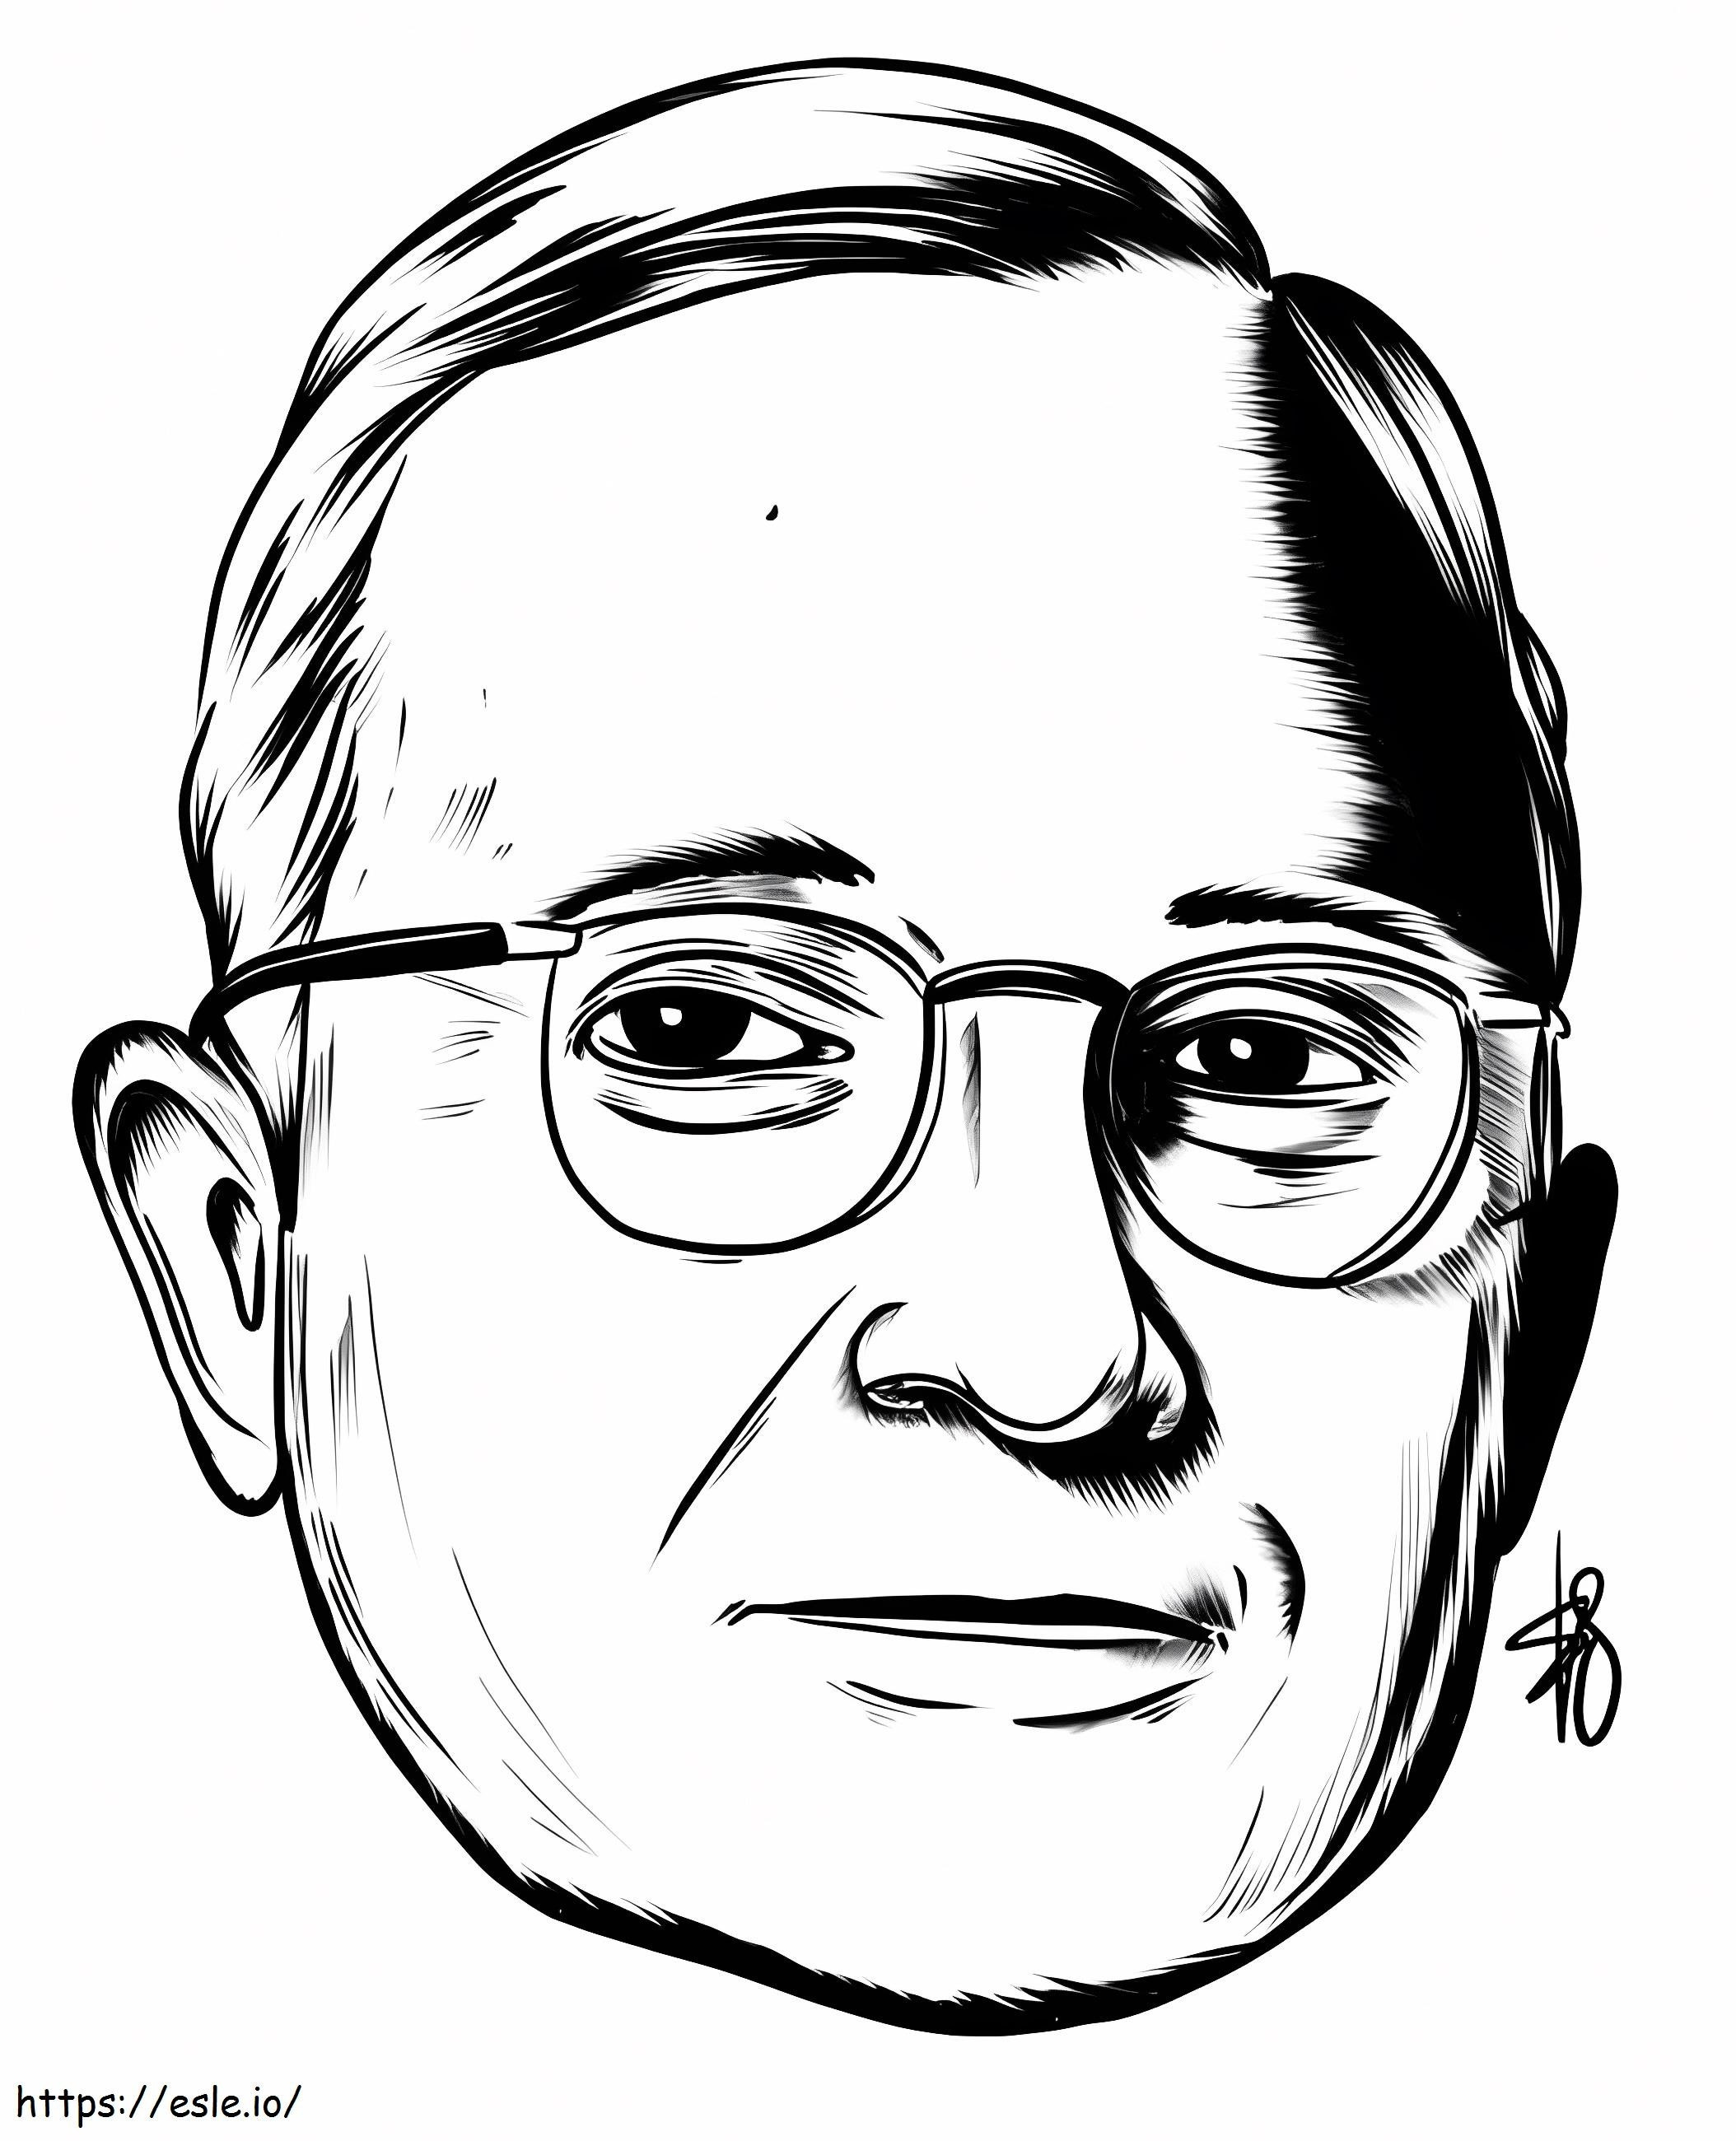 Free Printable President Harry S. Truman coloring page